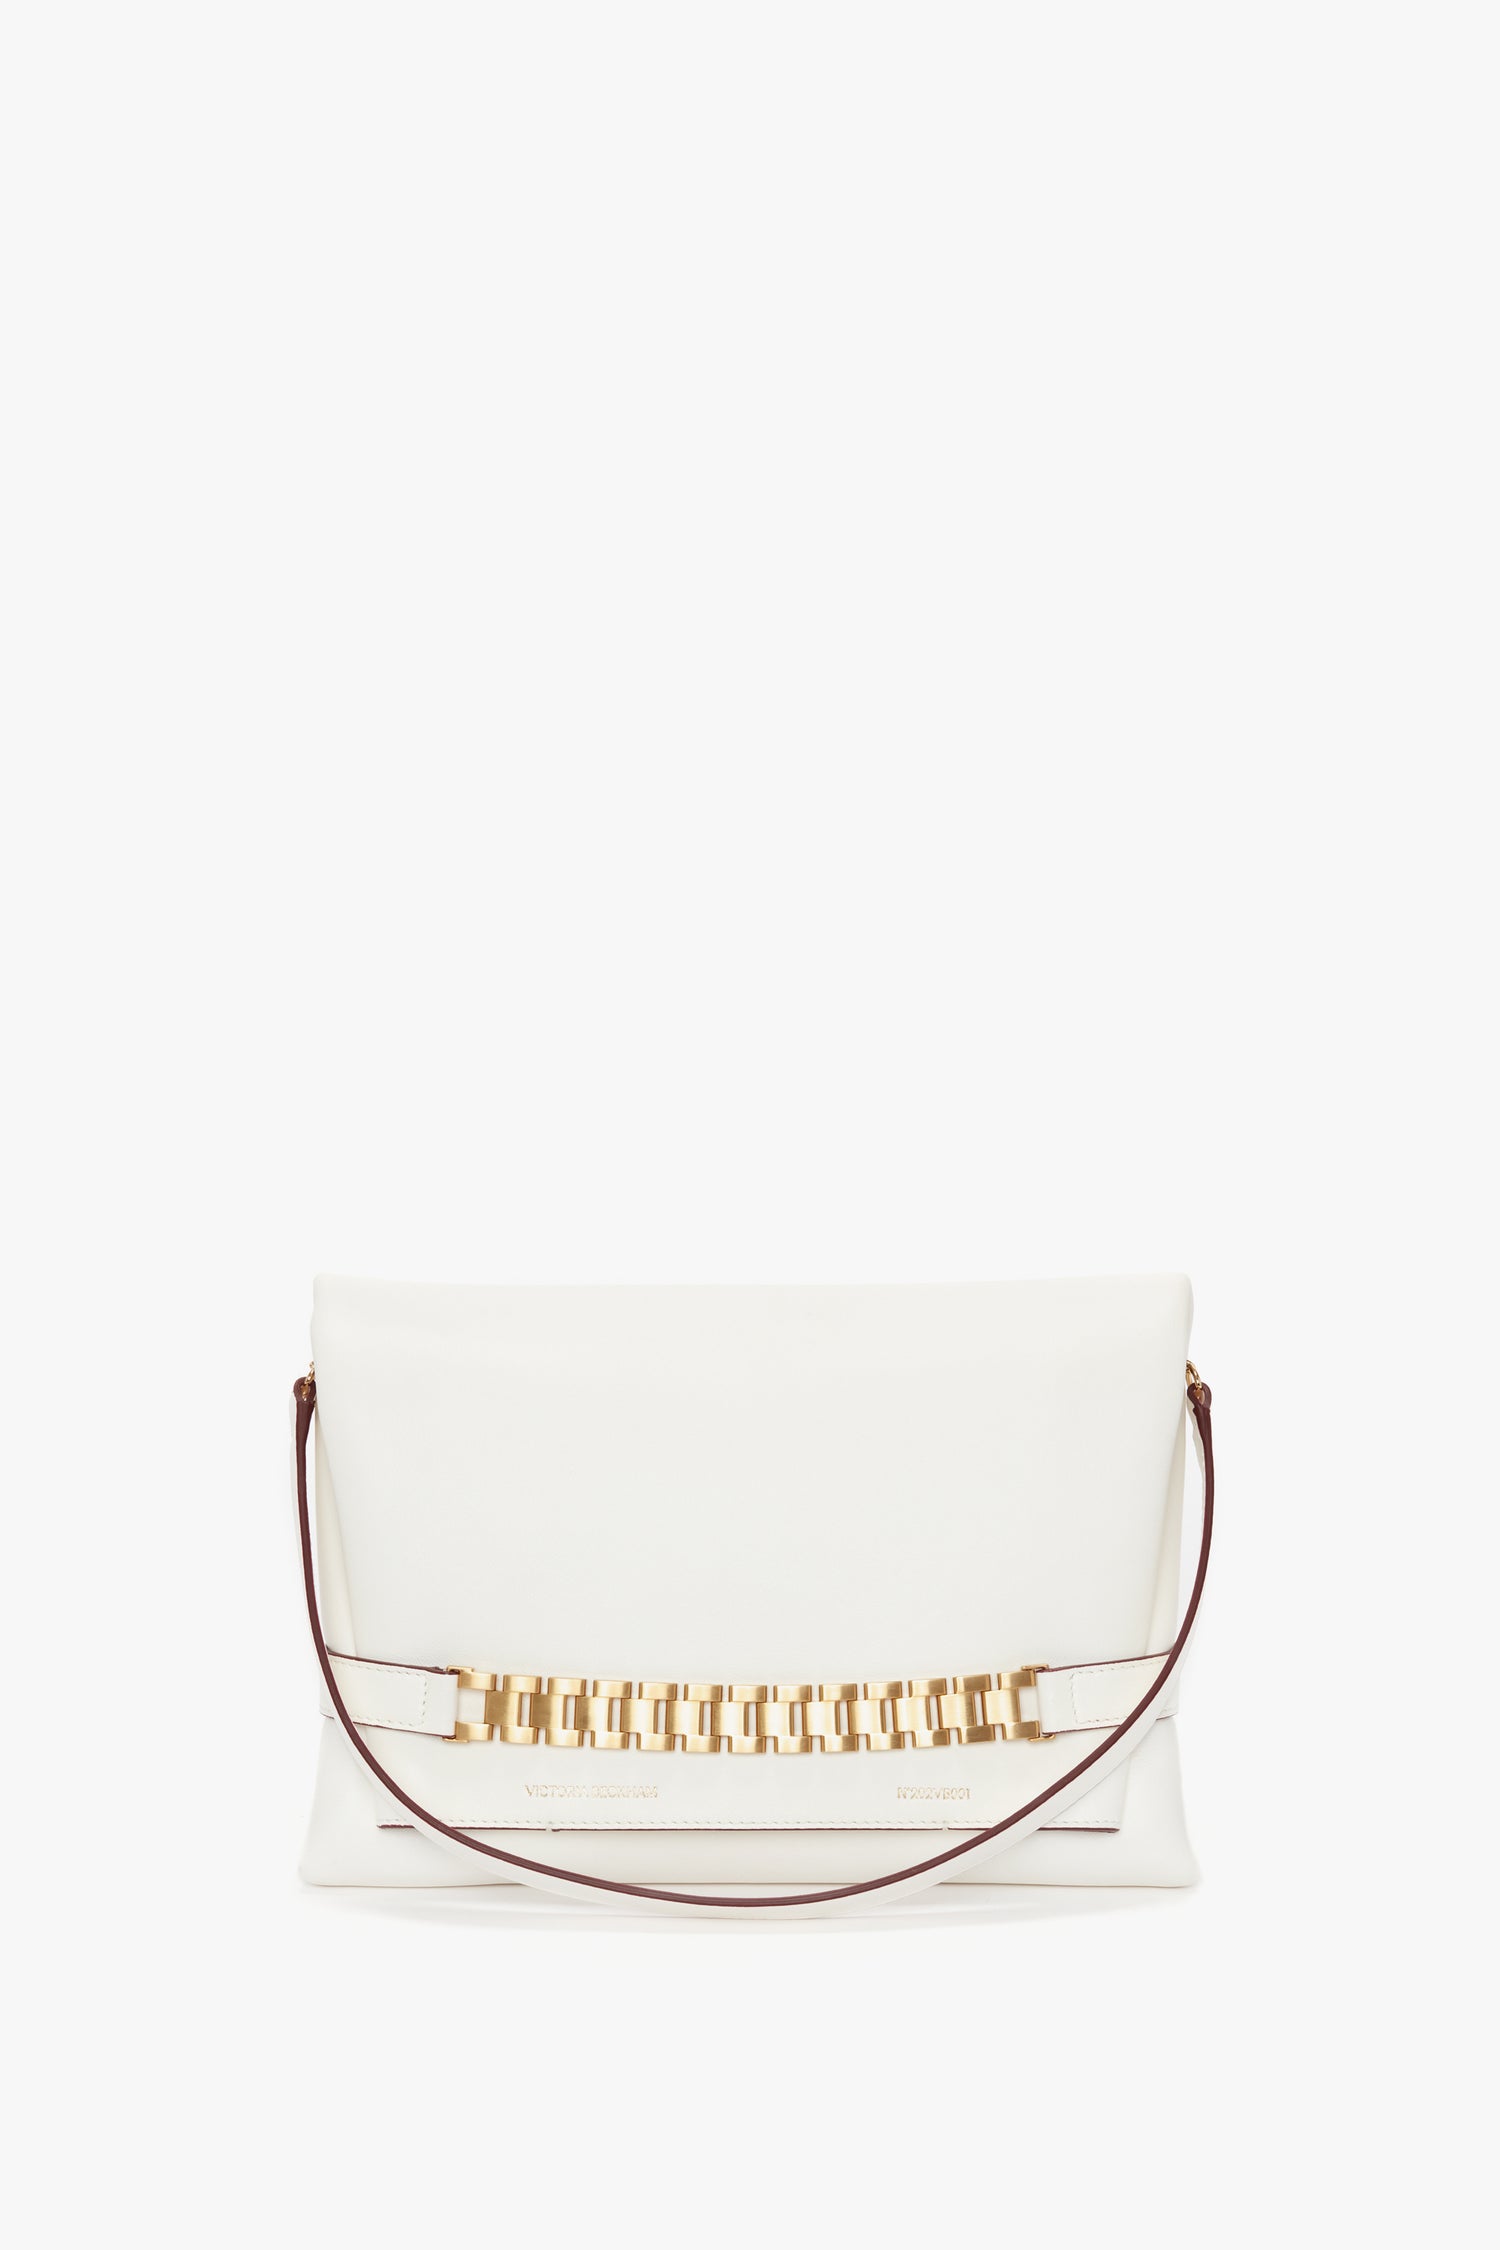 White Chain Pouch with Strap In White Leather by Victoria Beckham with a gold chain detail and Nappa leather on a white background.